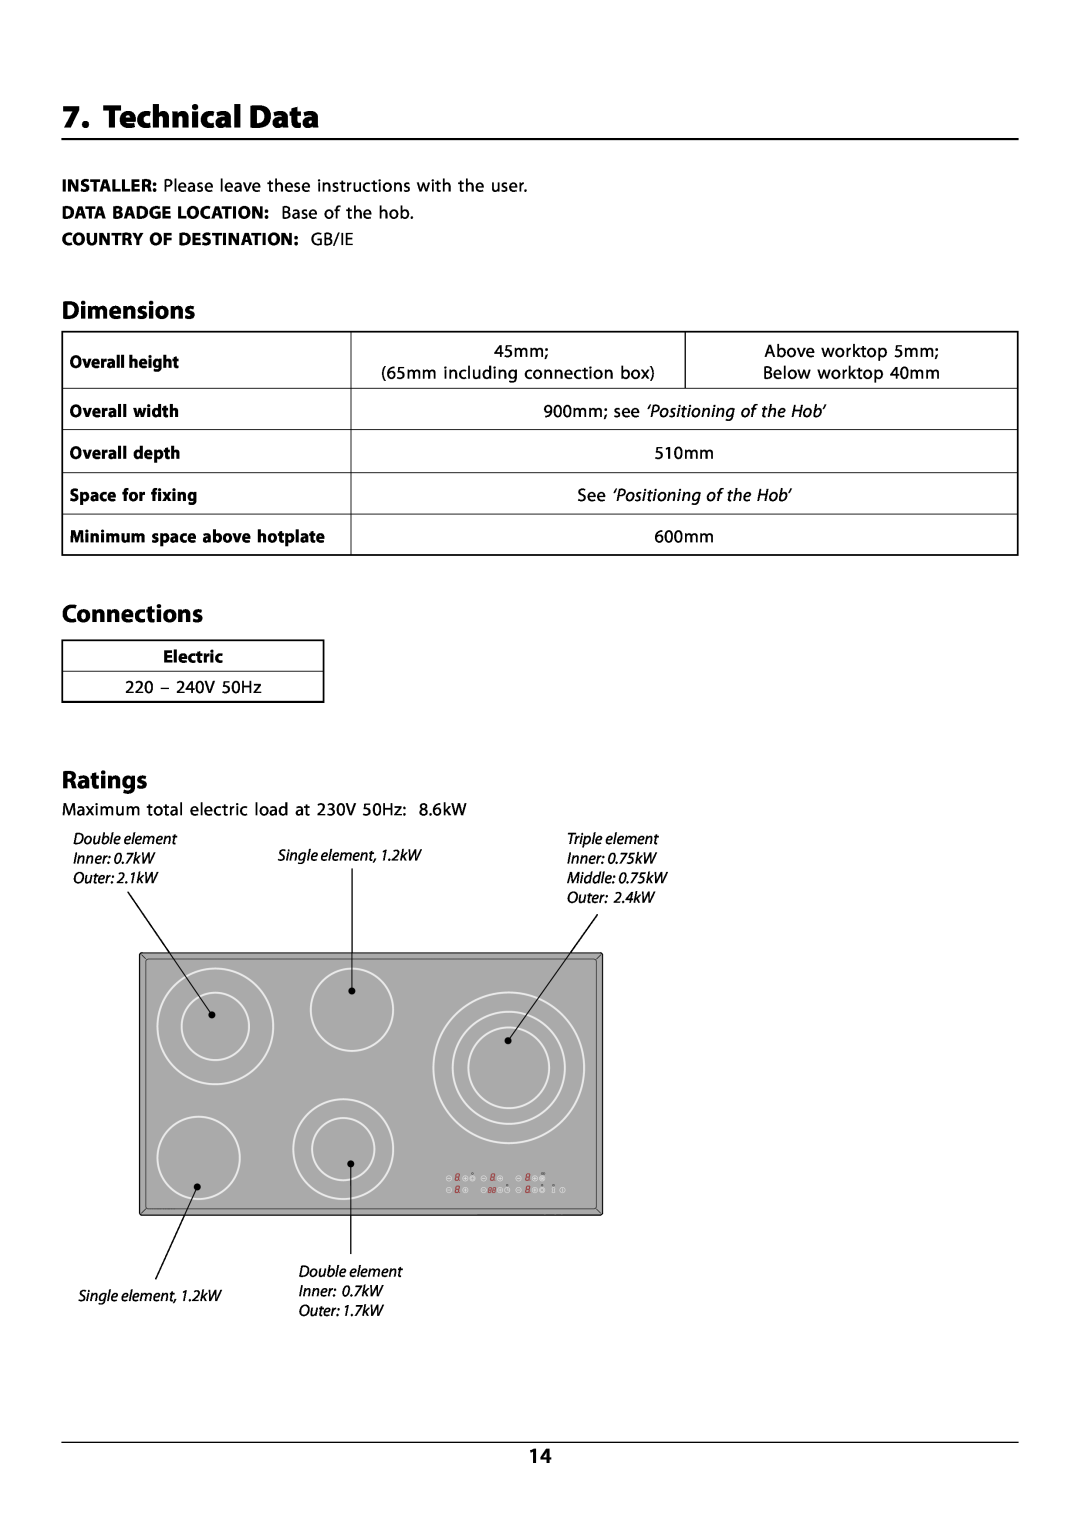 Rangemaster manual Technical Data, Dimensions, Connections, Ratings, DocNo.102-0003- Technical data - RC90 